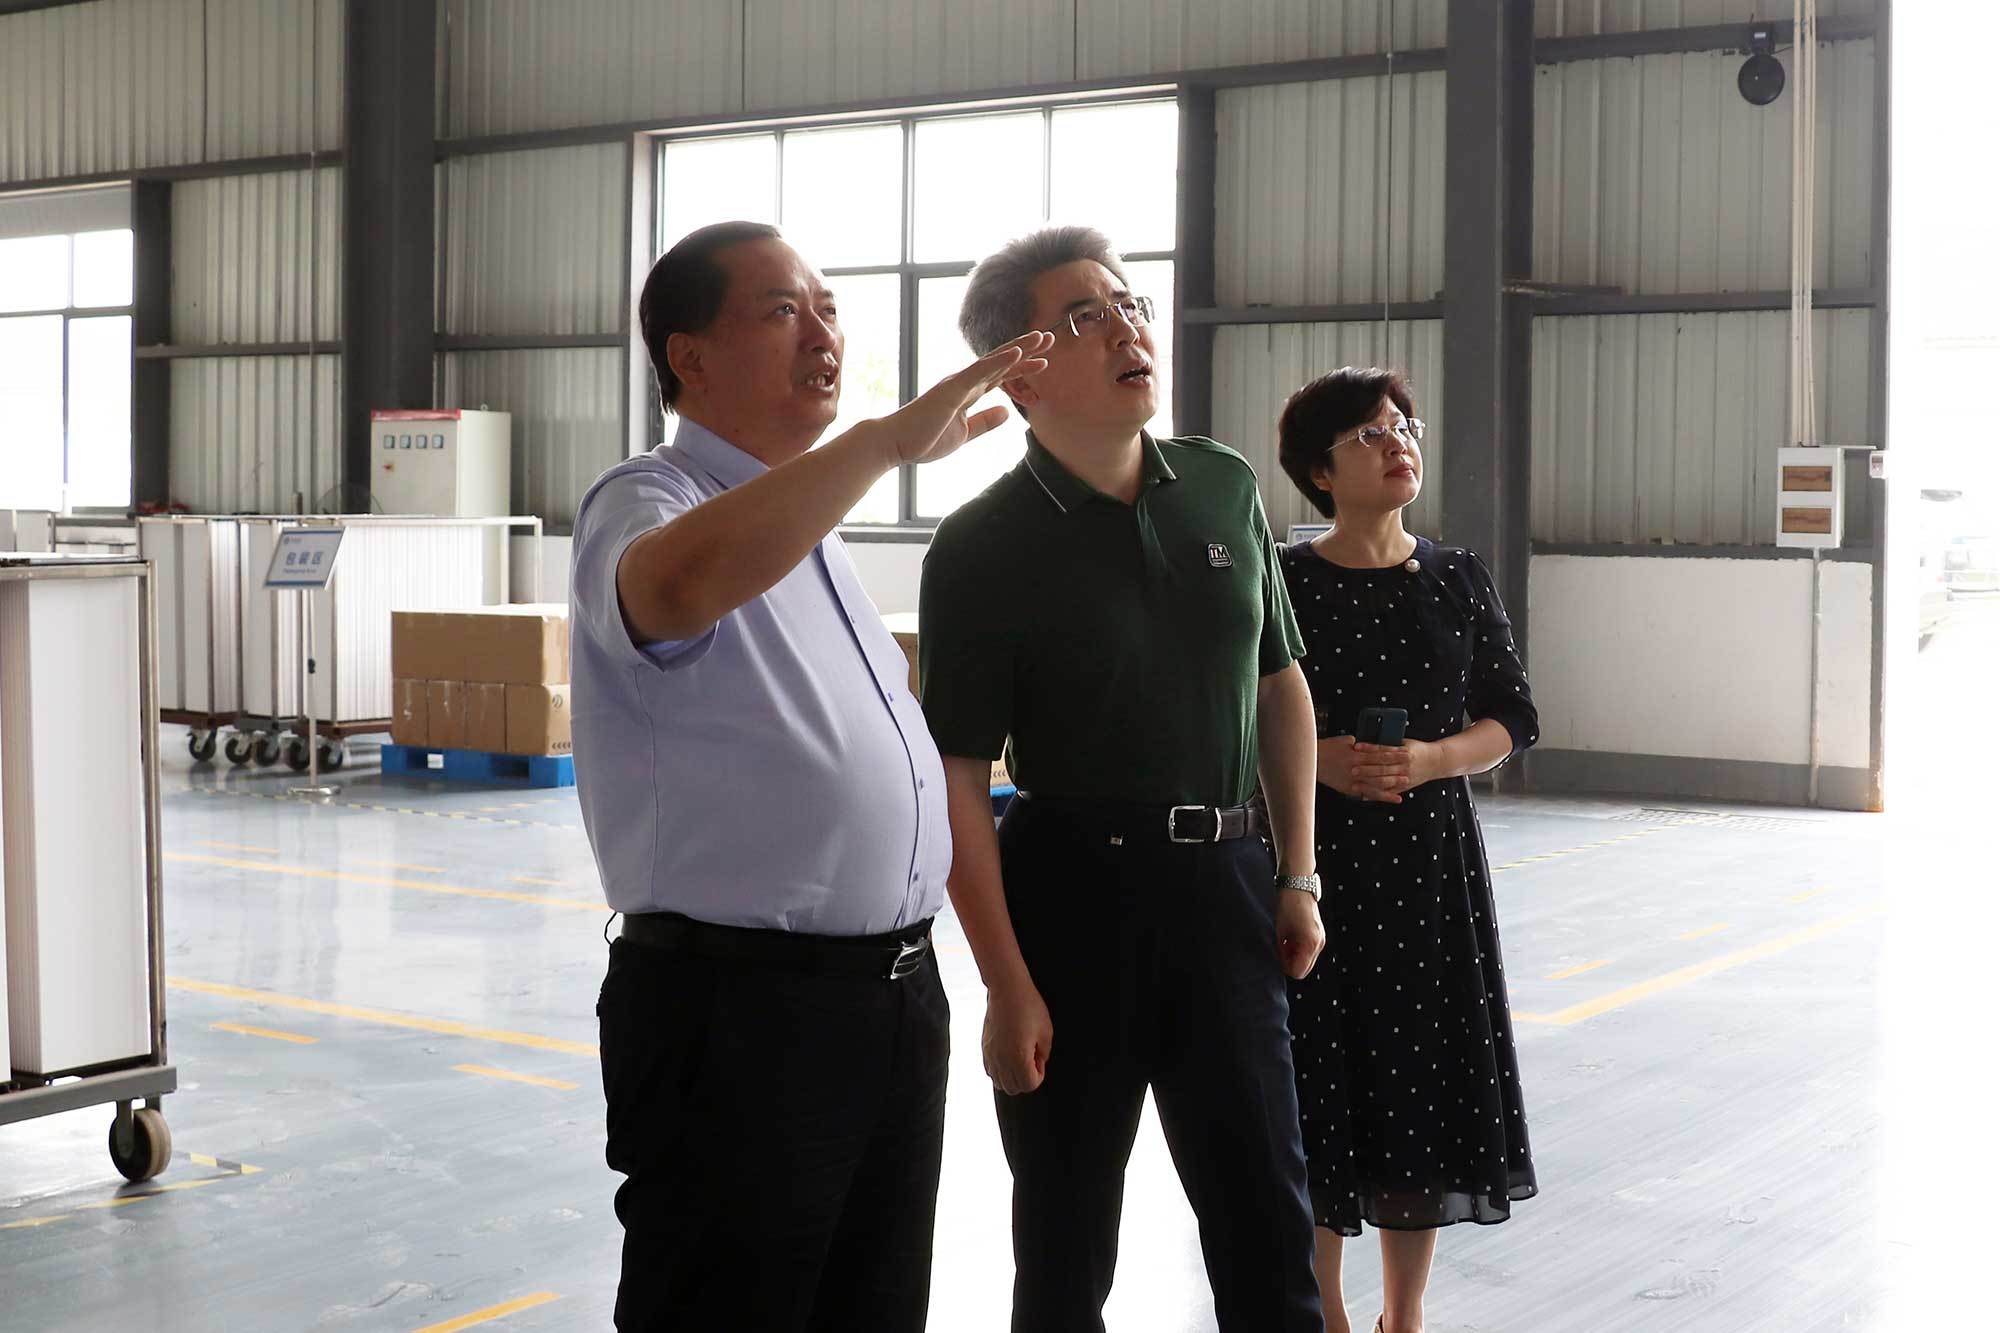 Liang Yibo, a member of the Standing Committee of the Changzhou Municipal Committee and Executive Vice Mayor, visited the Huayuan Ceramic Membrane Project of Xinfang Technology Group for investigation and research.